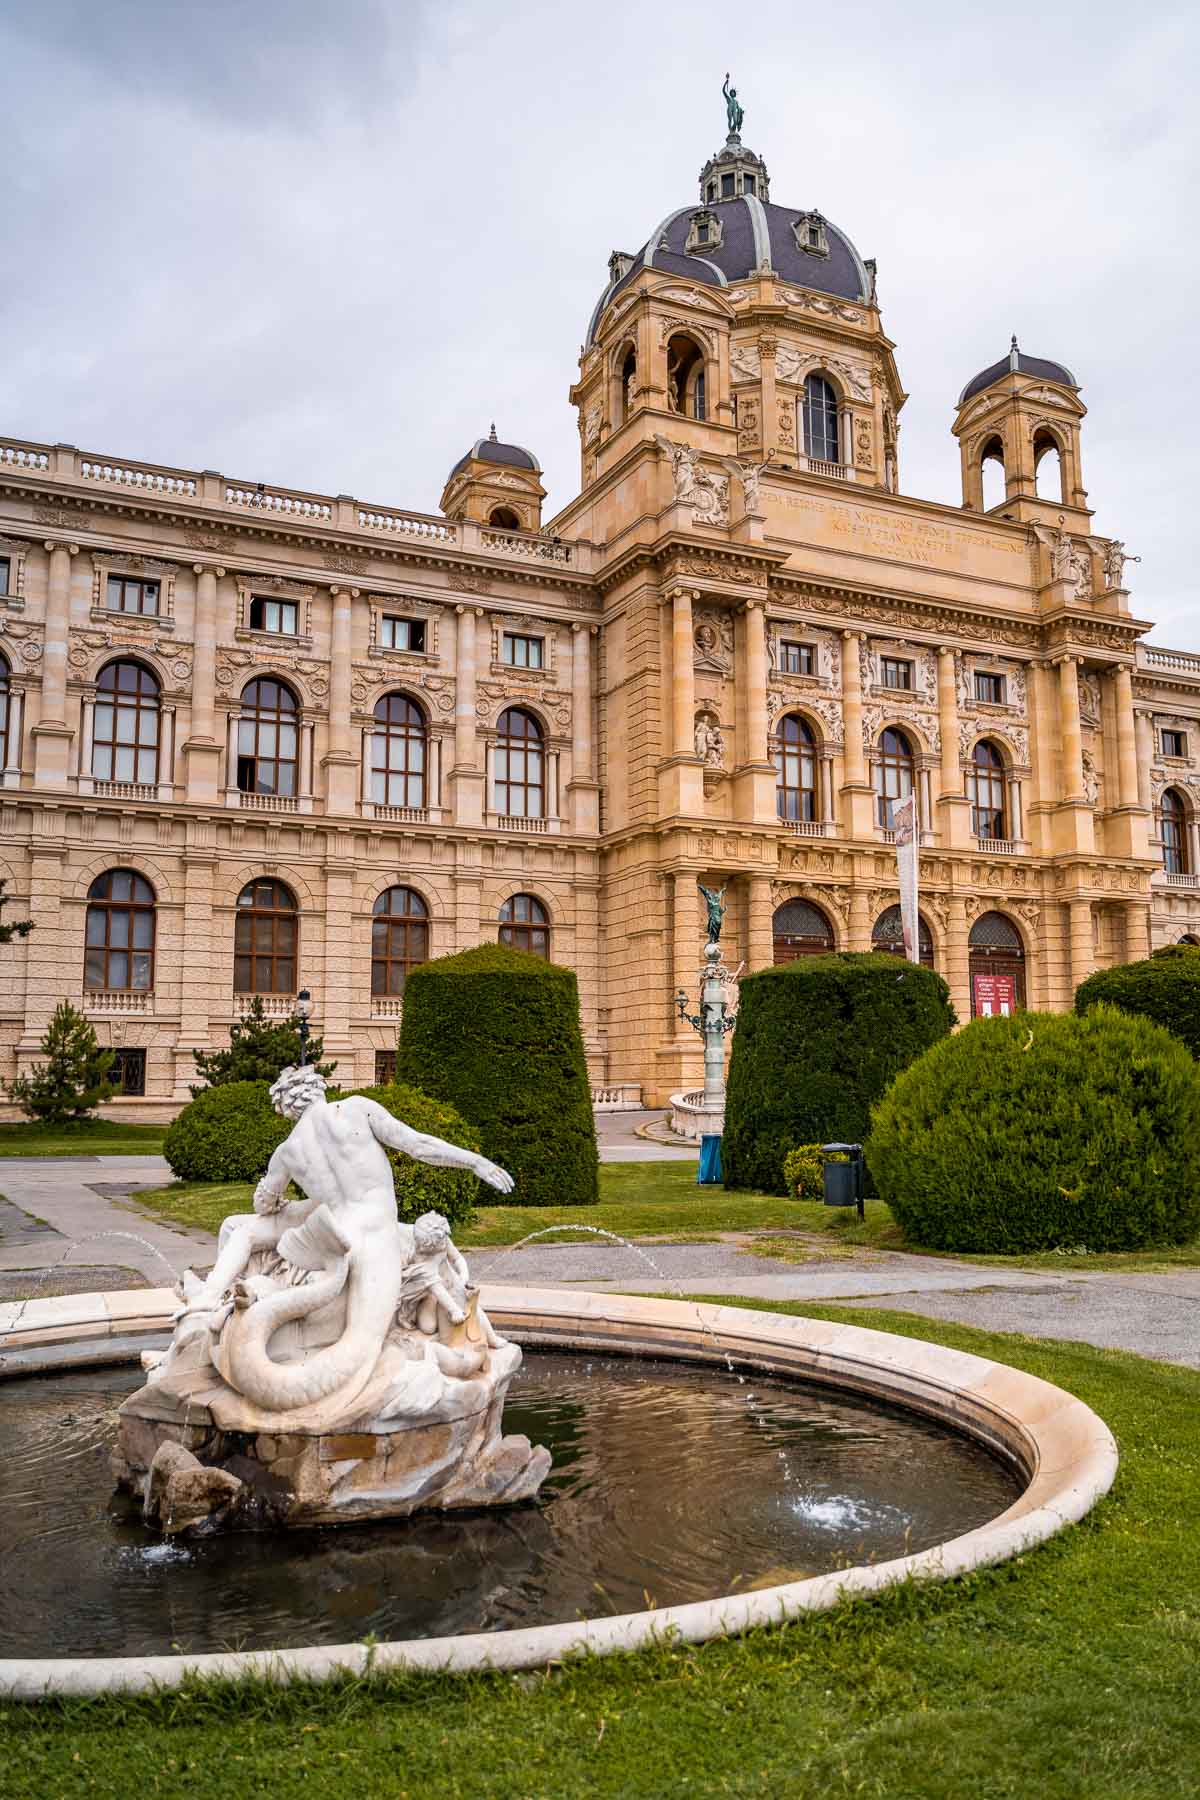 Museum of Natural History, Vienna